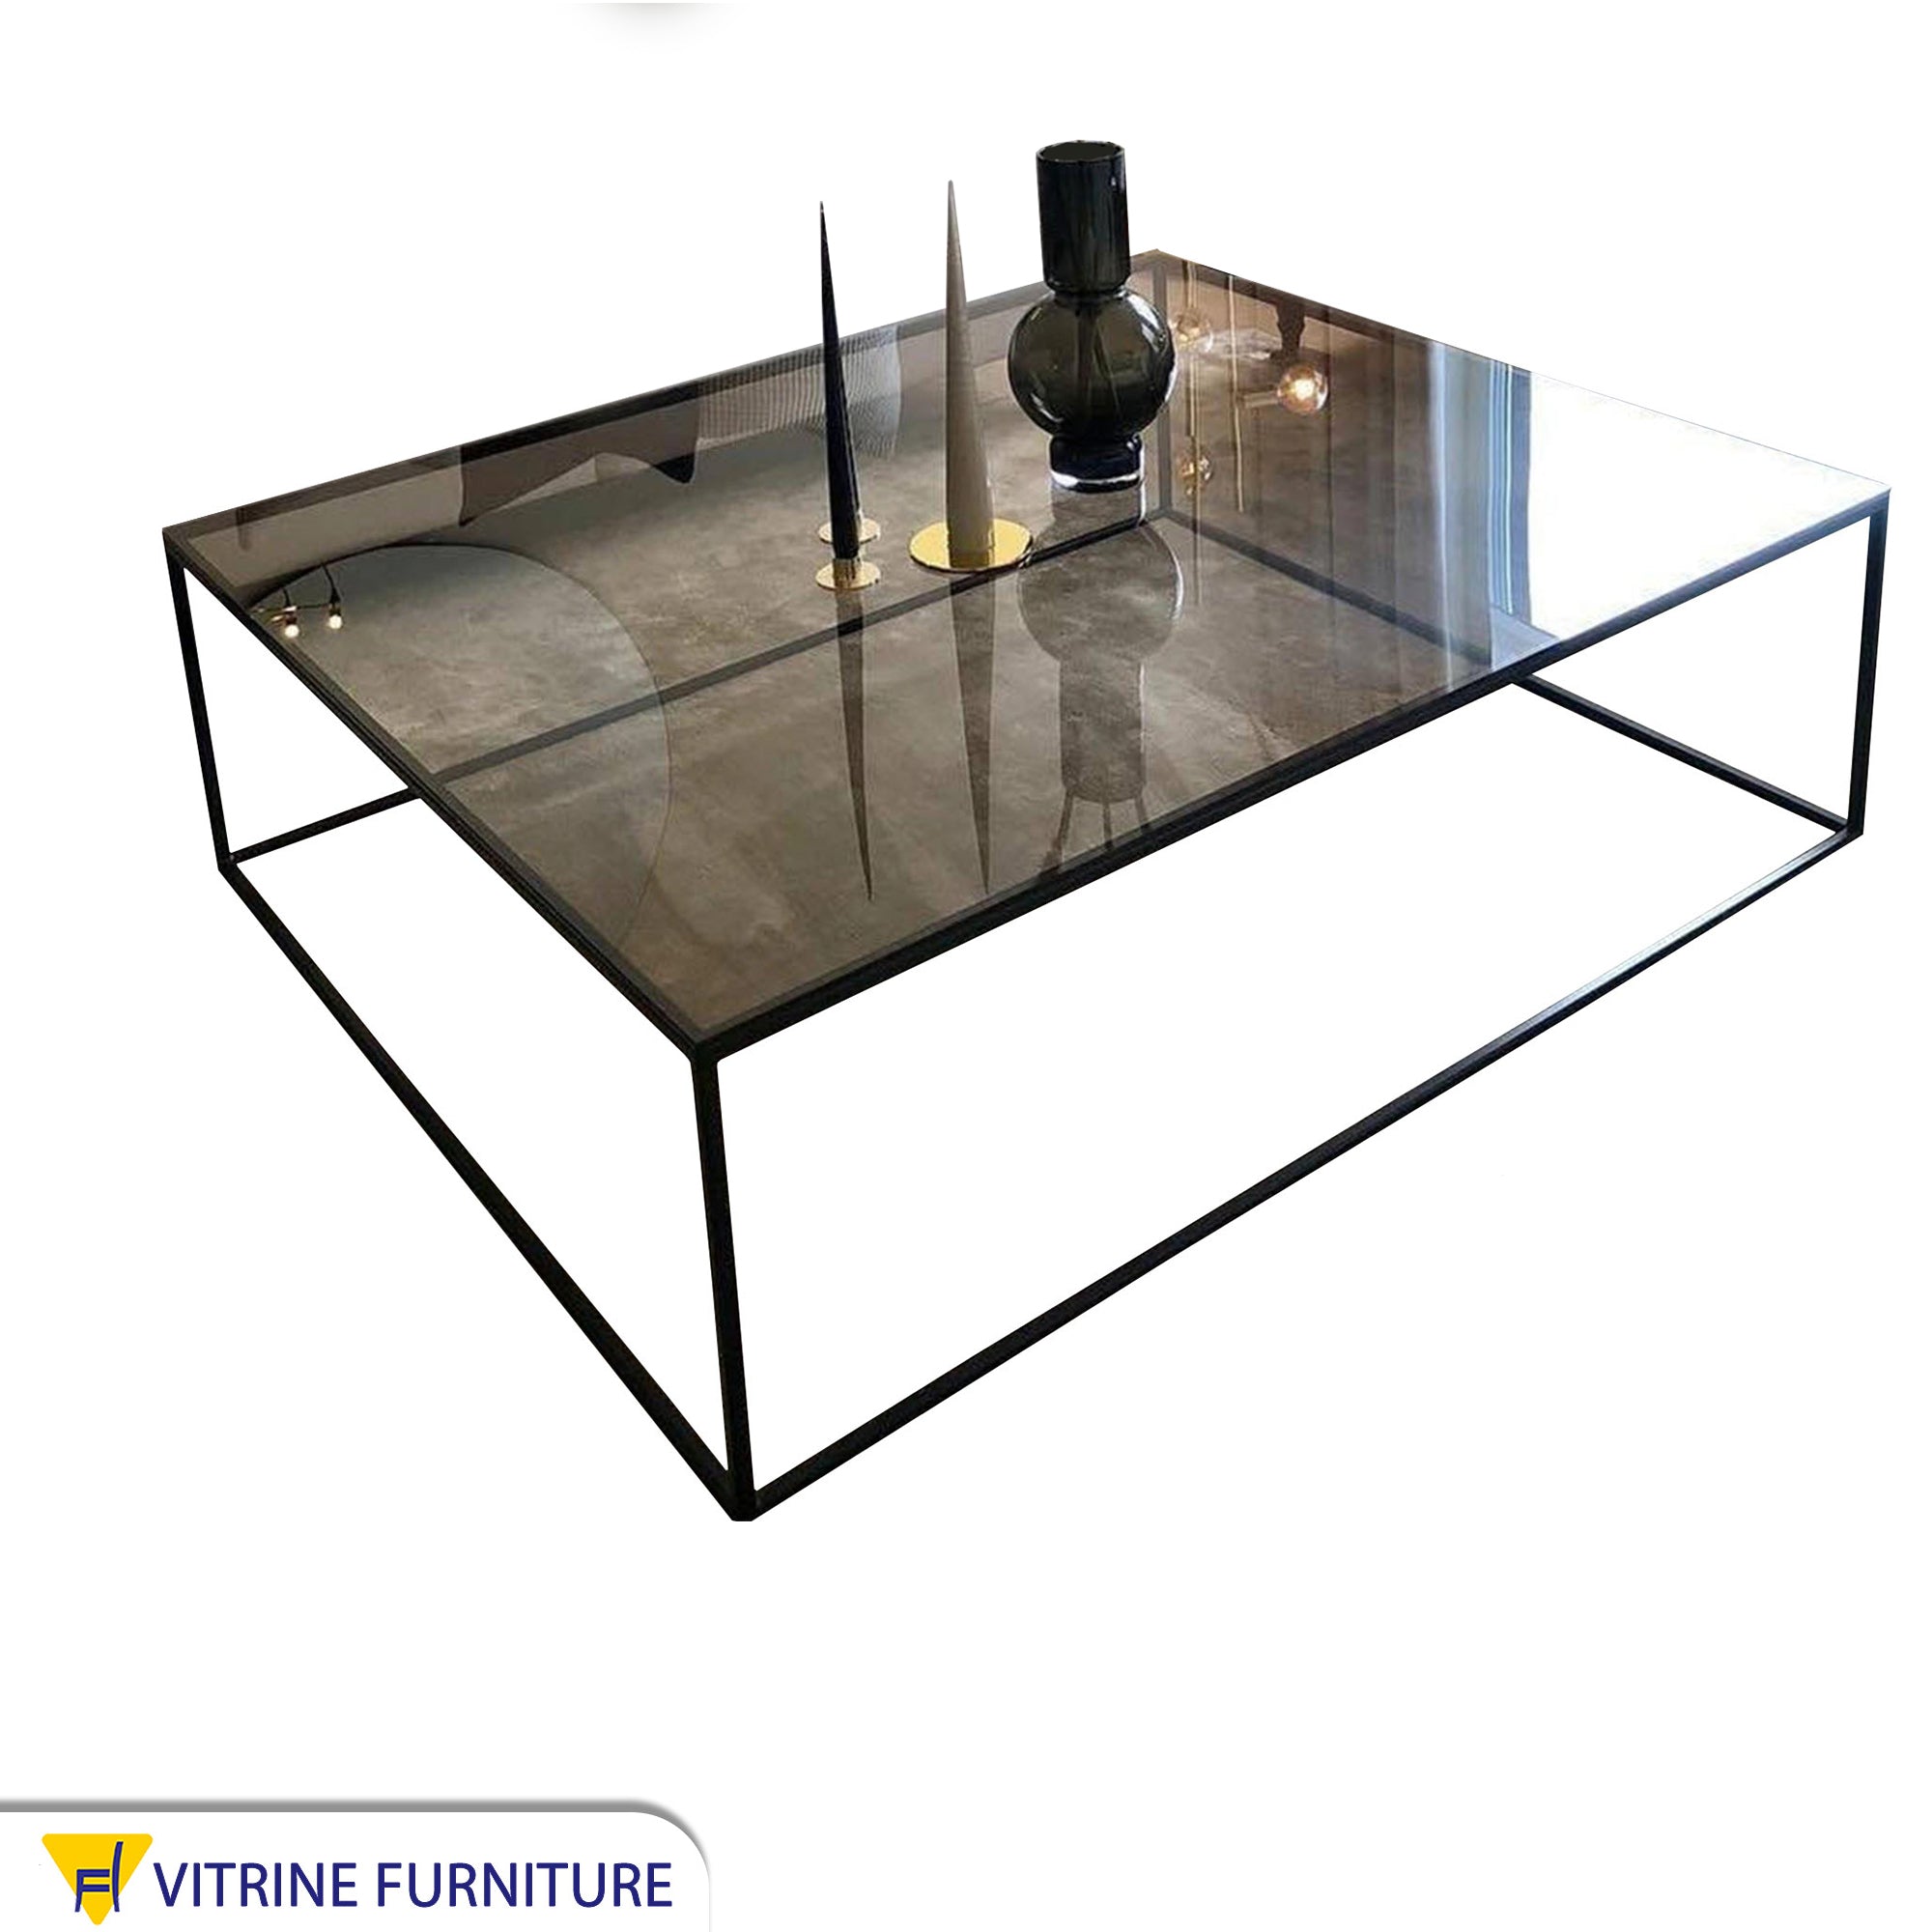 Large black table for the living room